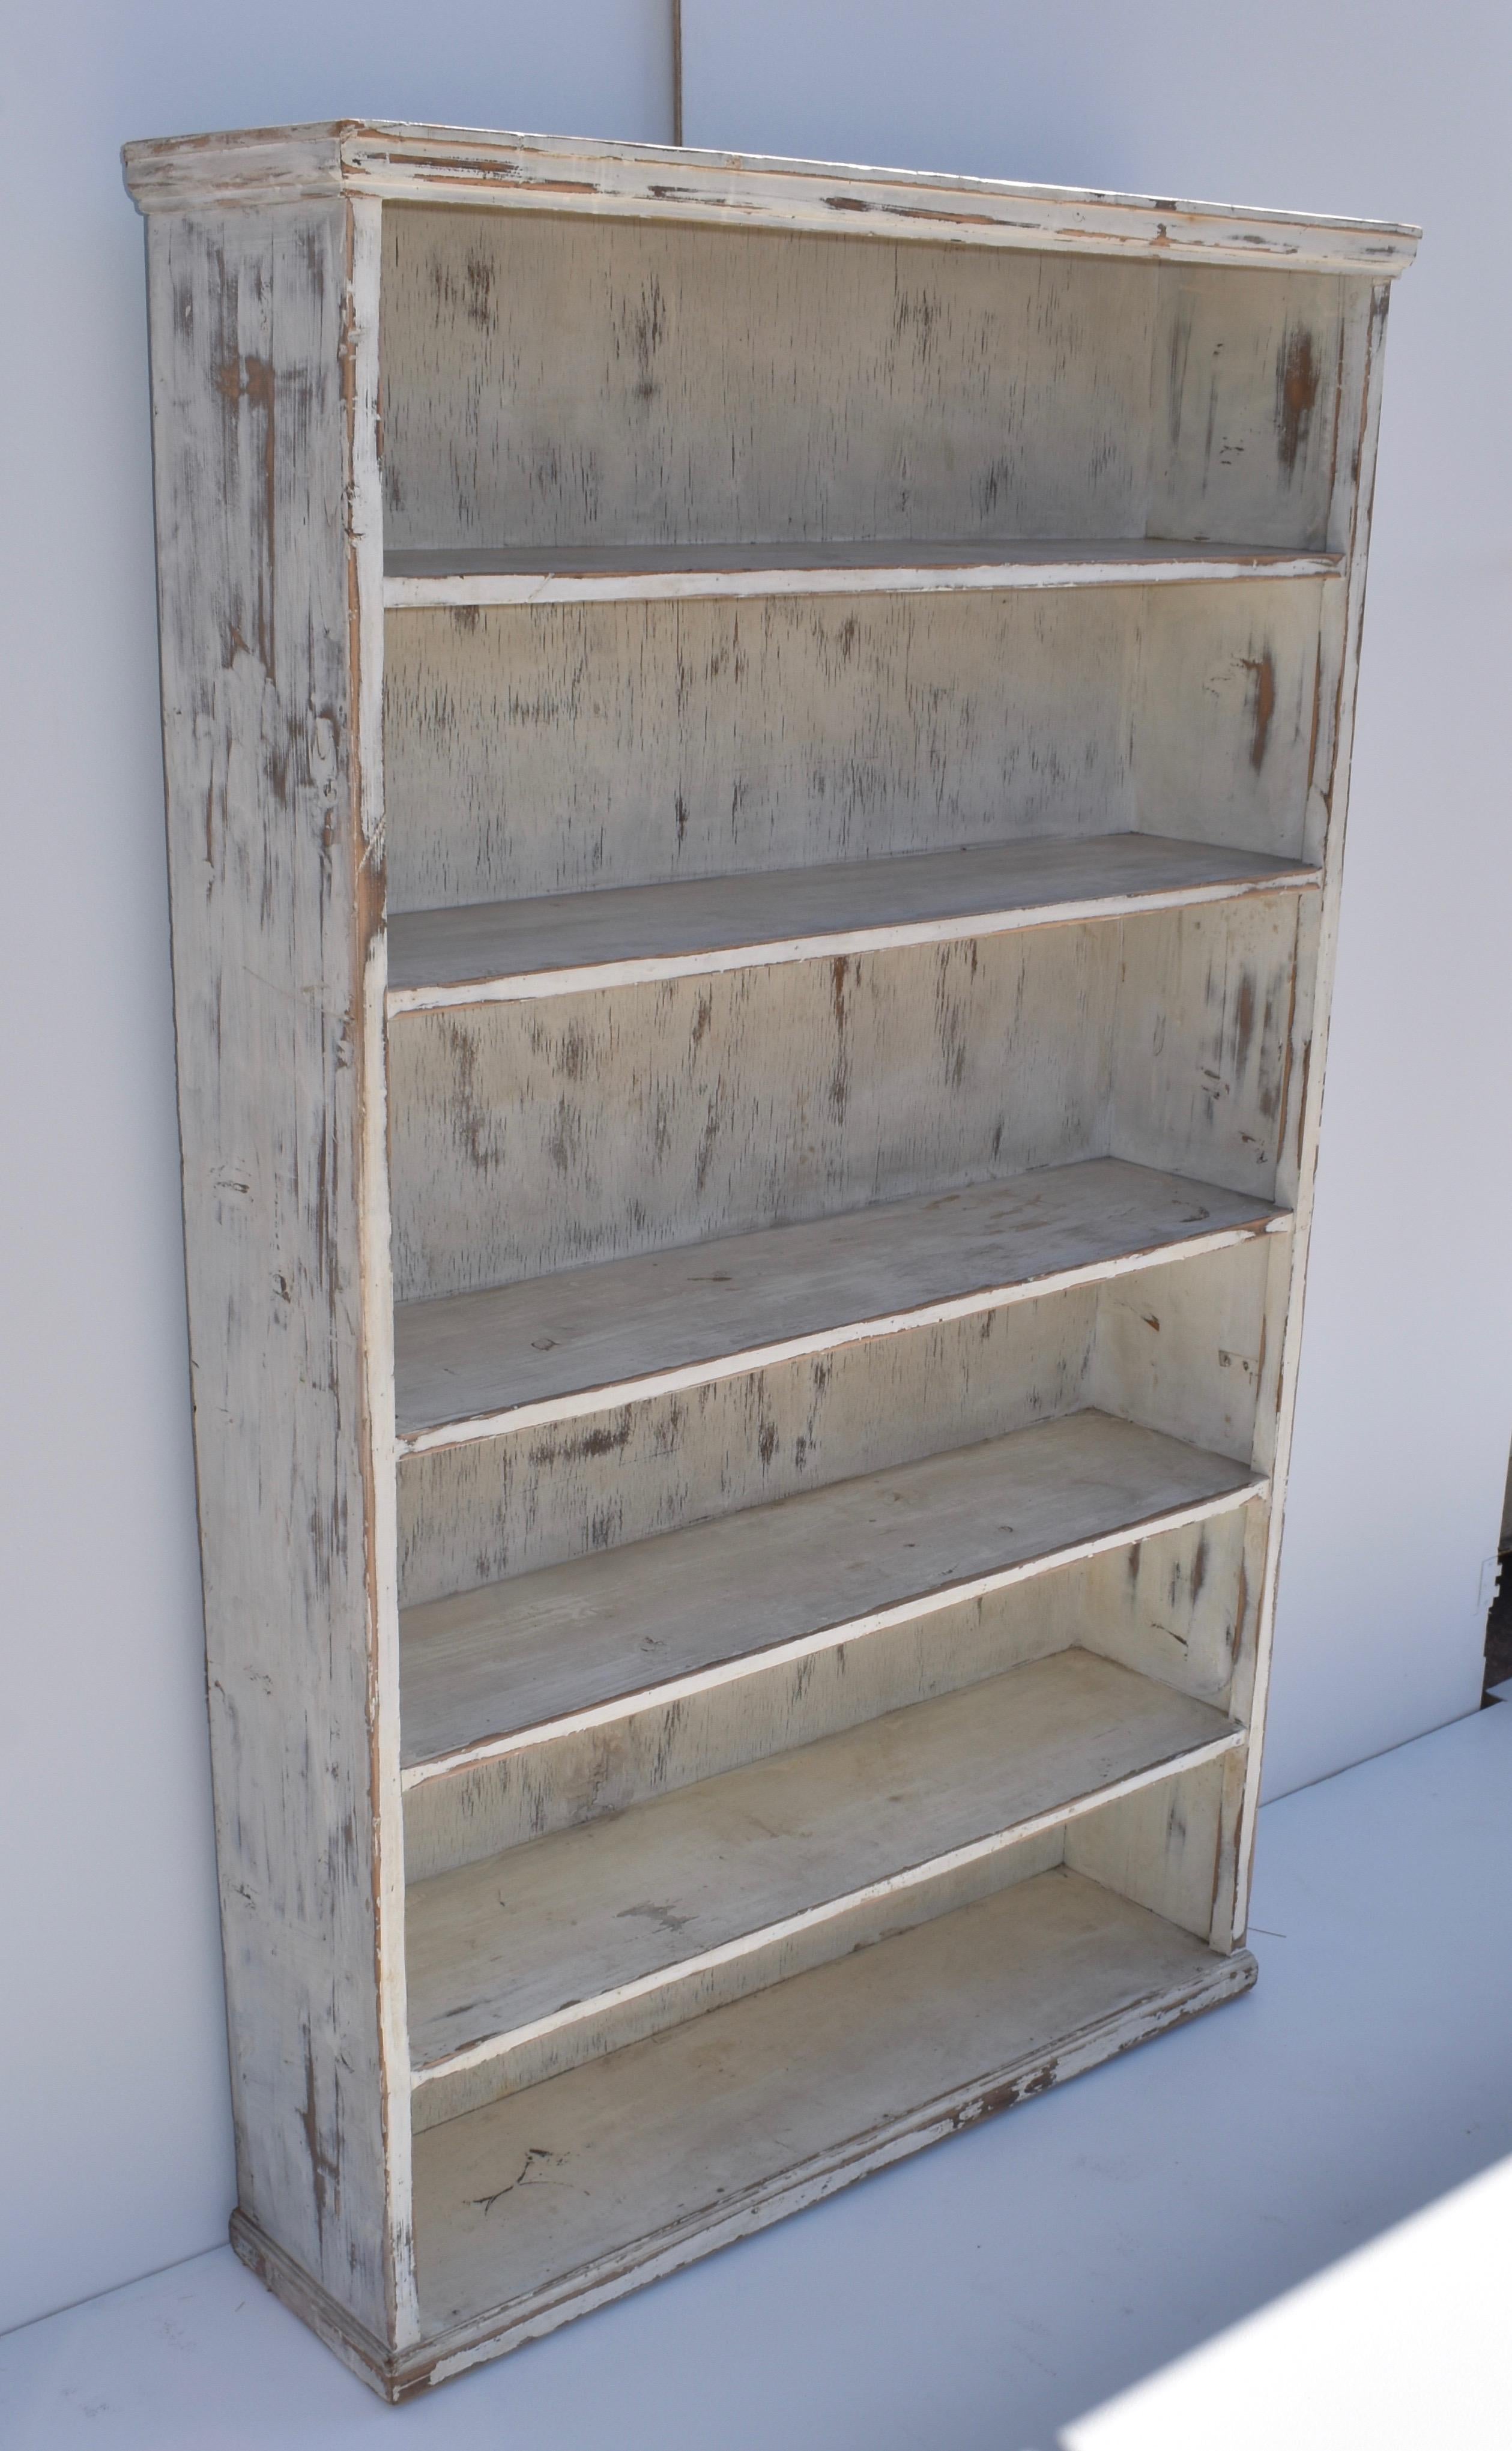 This is a versatile little shelf unit whose five shelves offer six storage spaces equally well-suited to the workshop, the kitchen, or the office. Its casual finish, old white paint worn through to old white paint and bare wood can blend with any